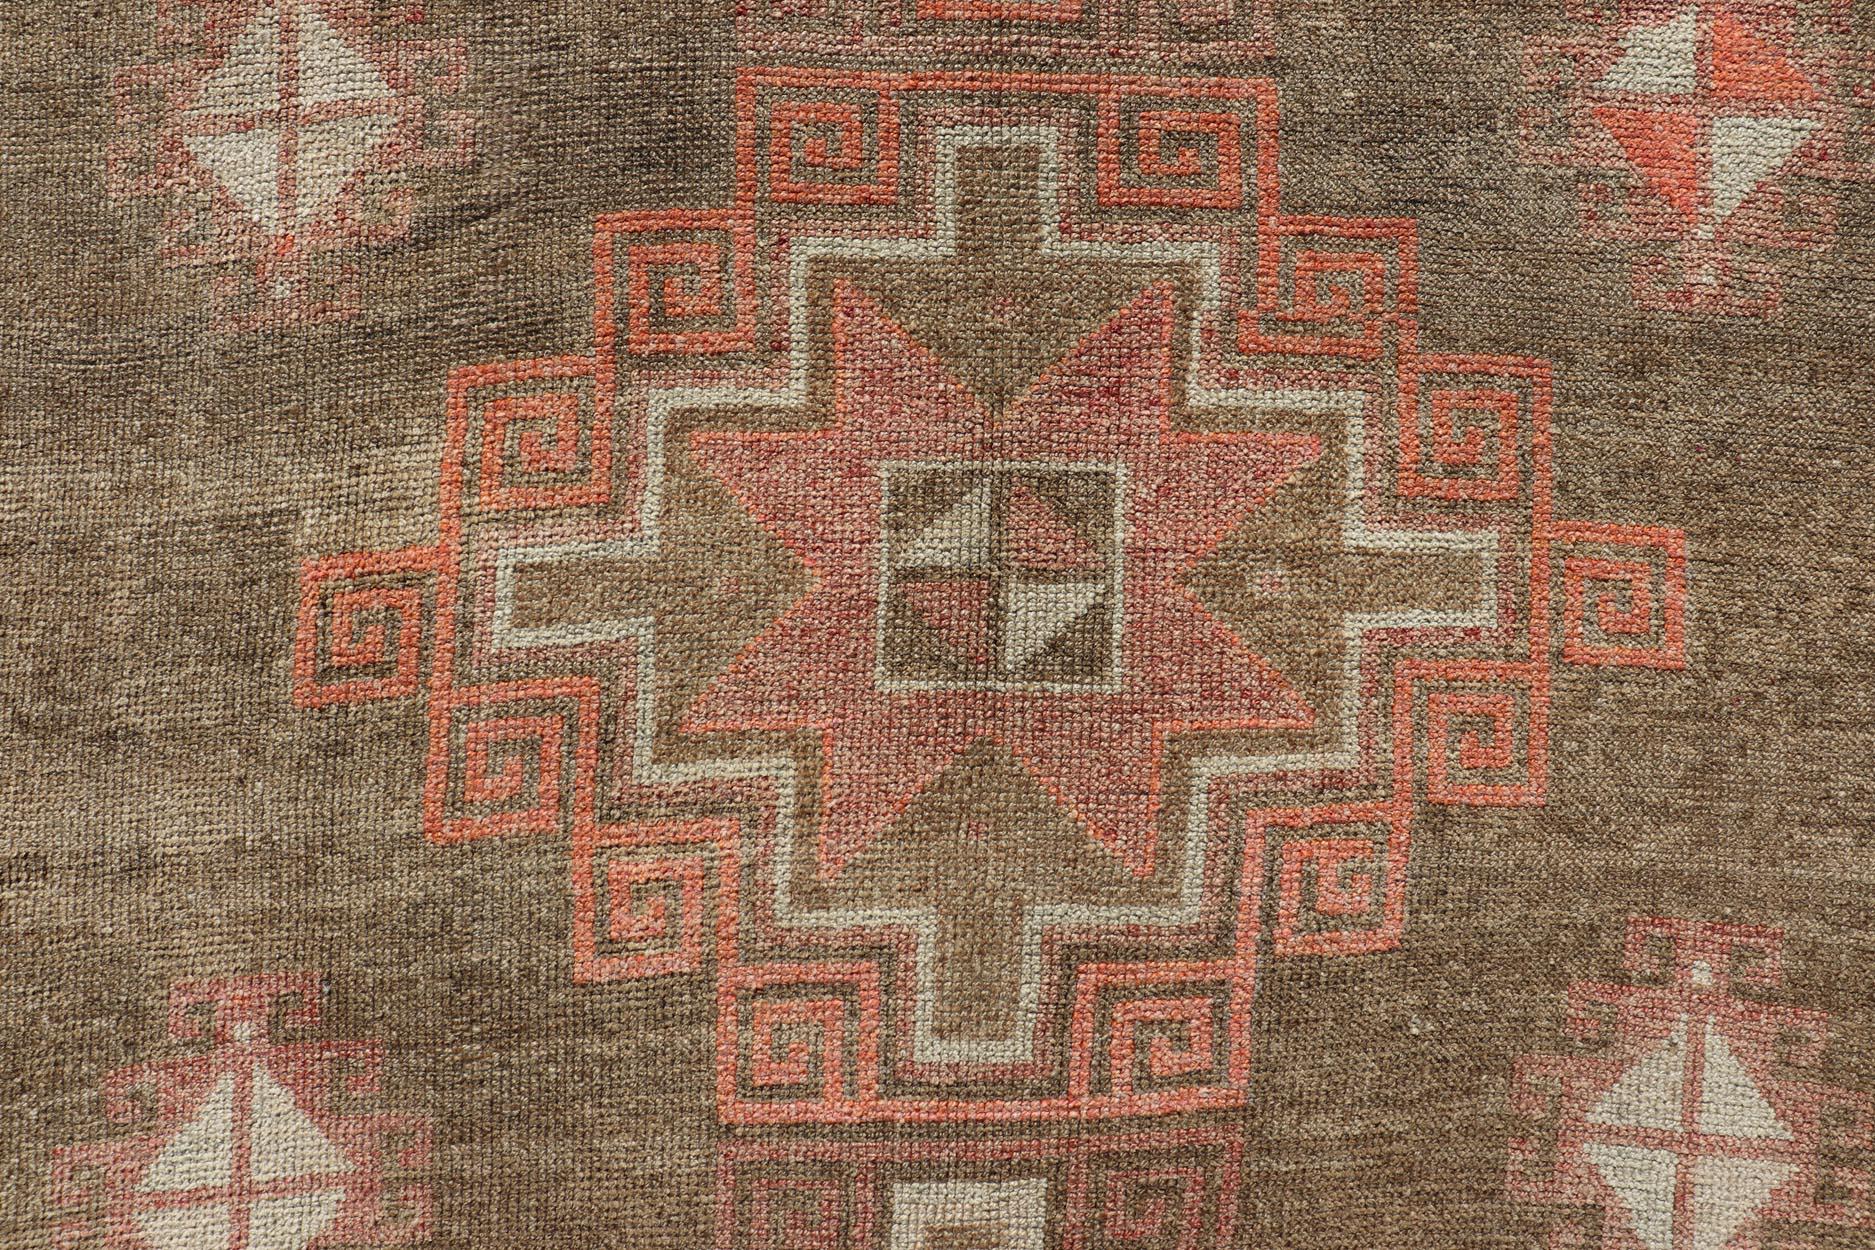 Vintage Hand Knotted Kars Gallery runner from Turkey with Medallion design in various tones of red, orange taupe. and brown. Keivan Woven Arts / rug EN-13243, country of origin / type: Turkey / Kars, circa 1940

Measures: 6'0 x 14'6.